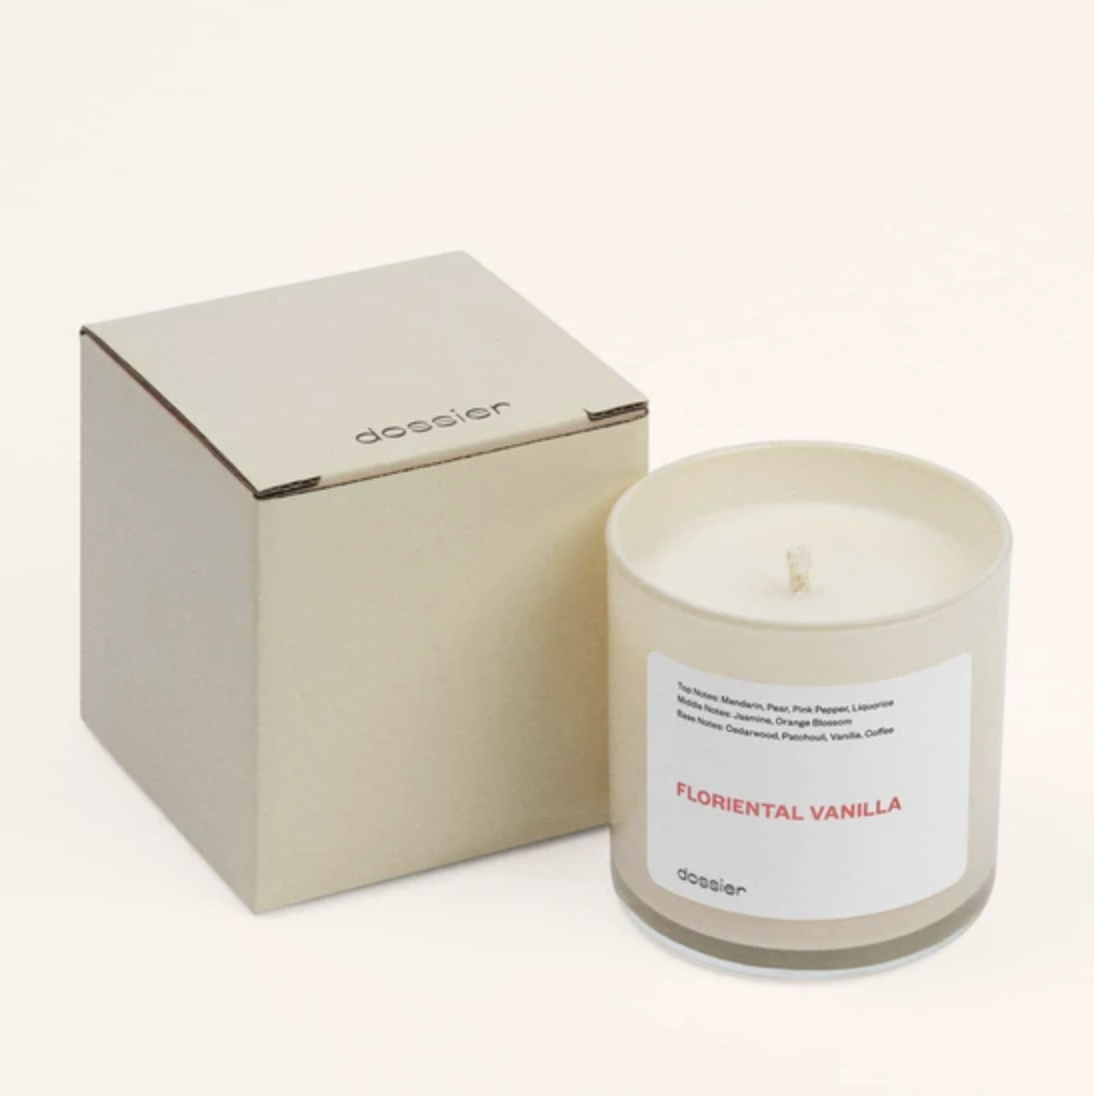 A stock photo of the Floriental Vanilla candle is shown